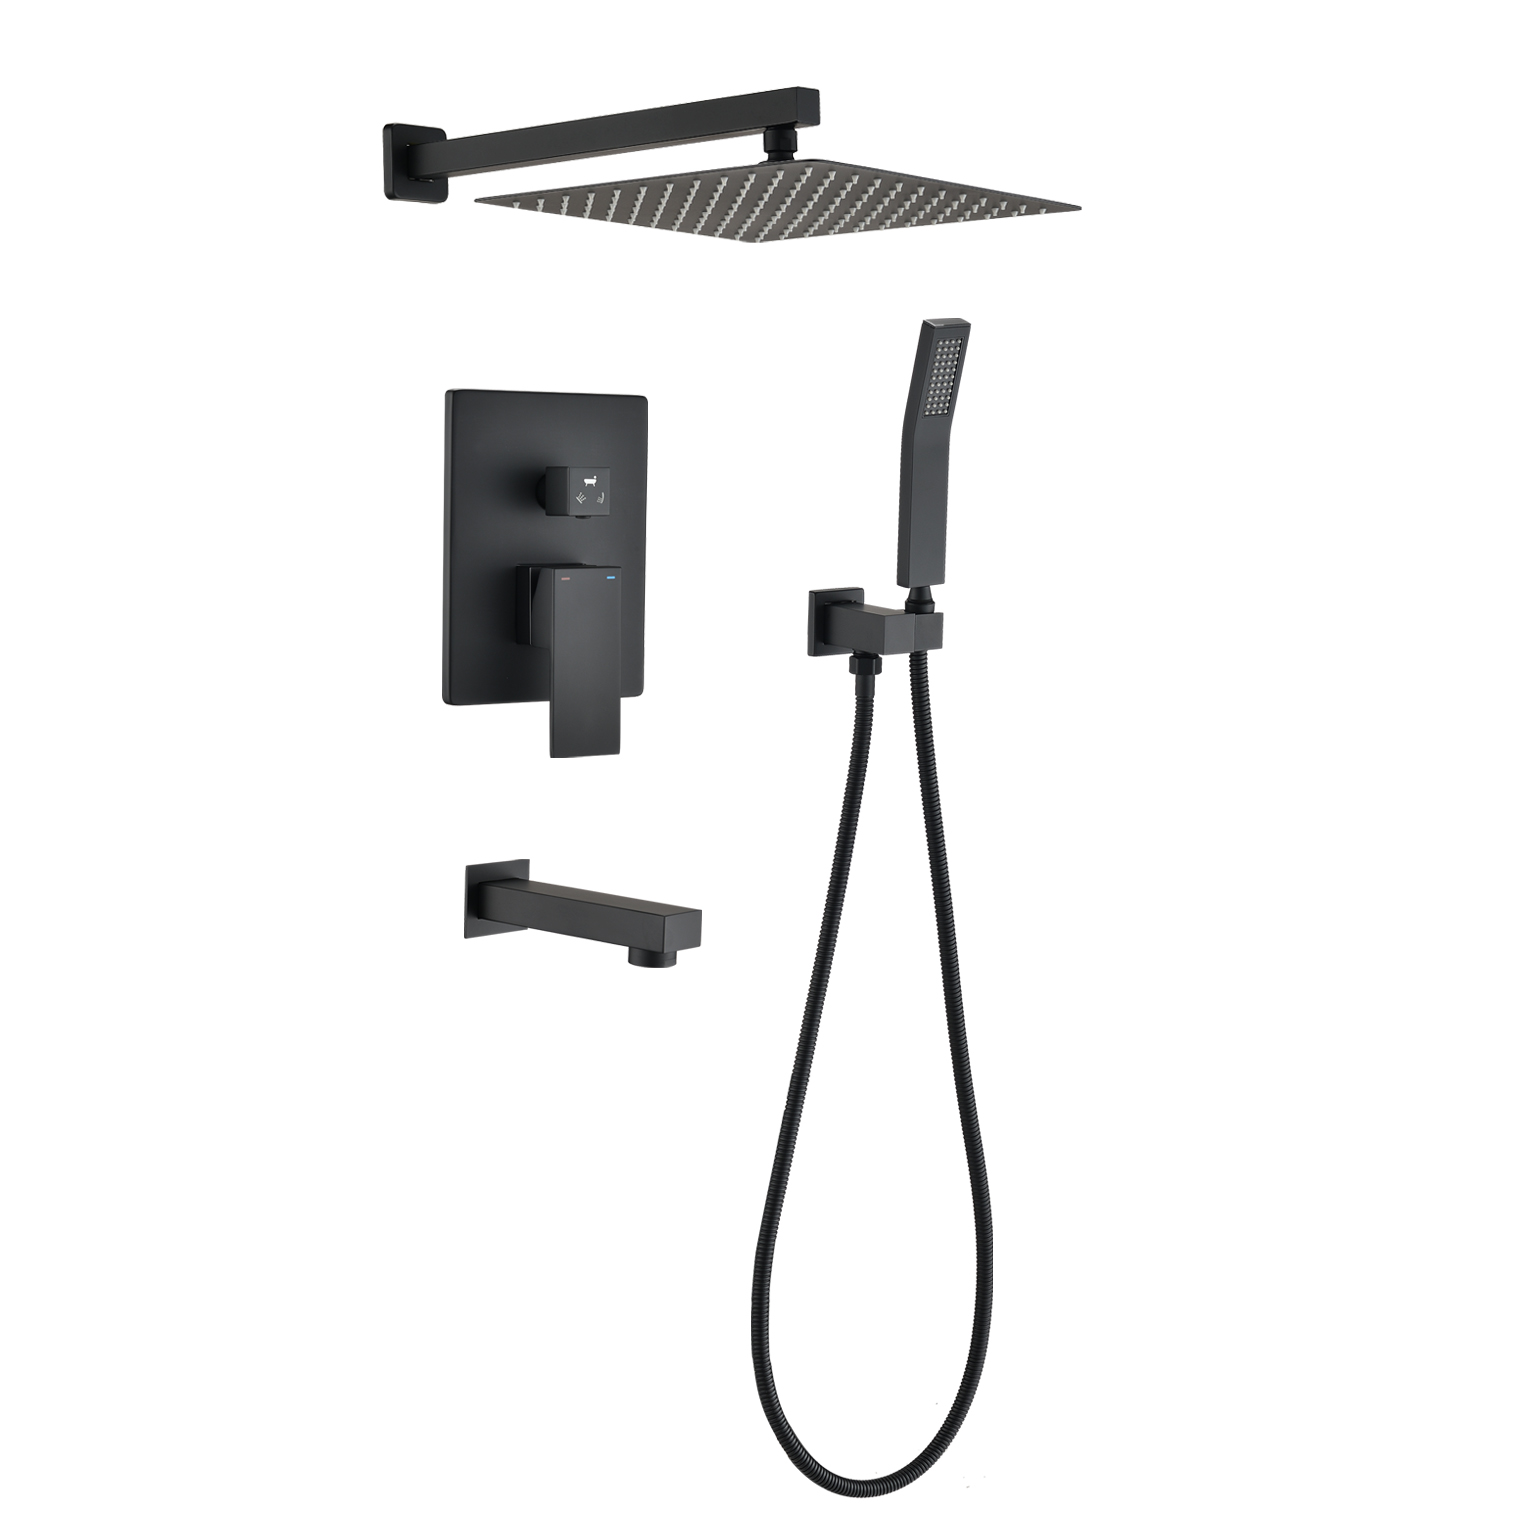 10 Inch Shower Head Kit Shower System Shower Faucet With Tub Spout Faucet And Hand-held Pressure Balance-Boyel Living